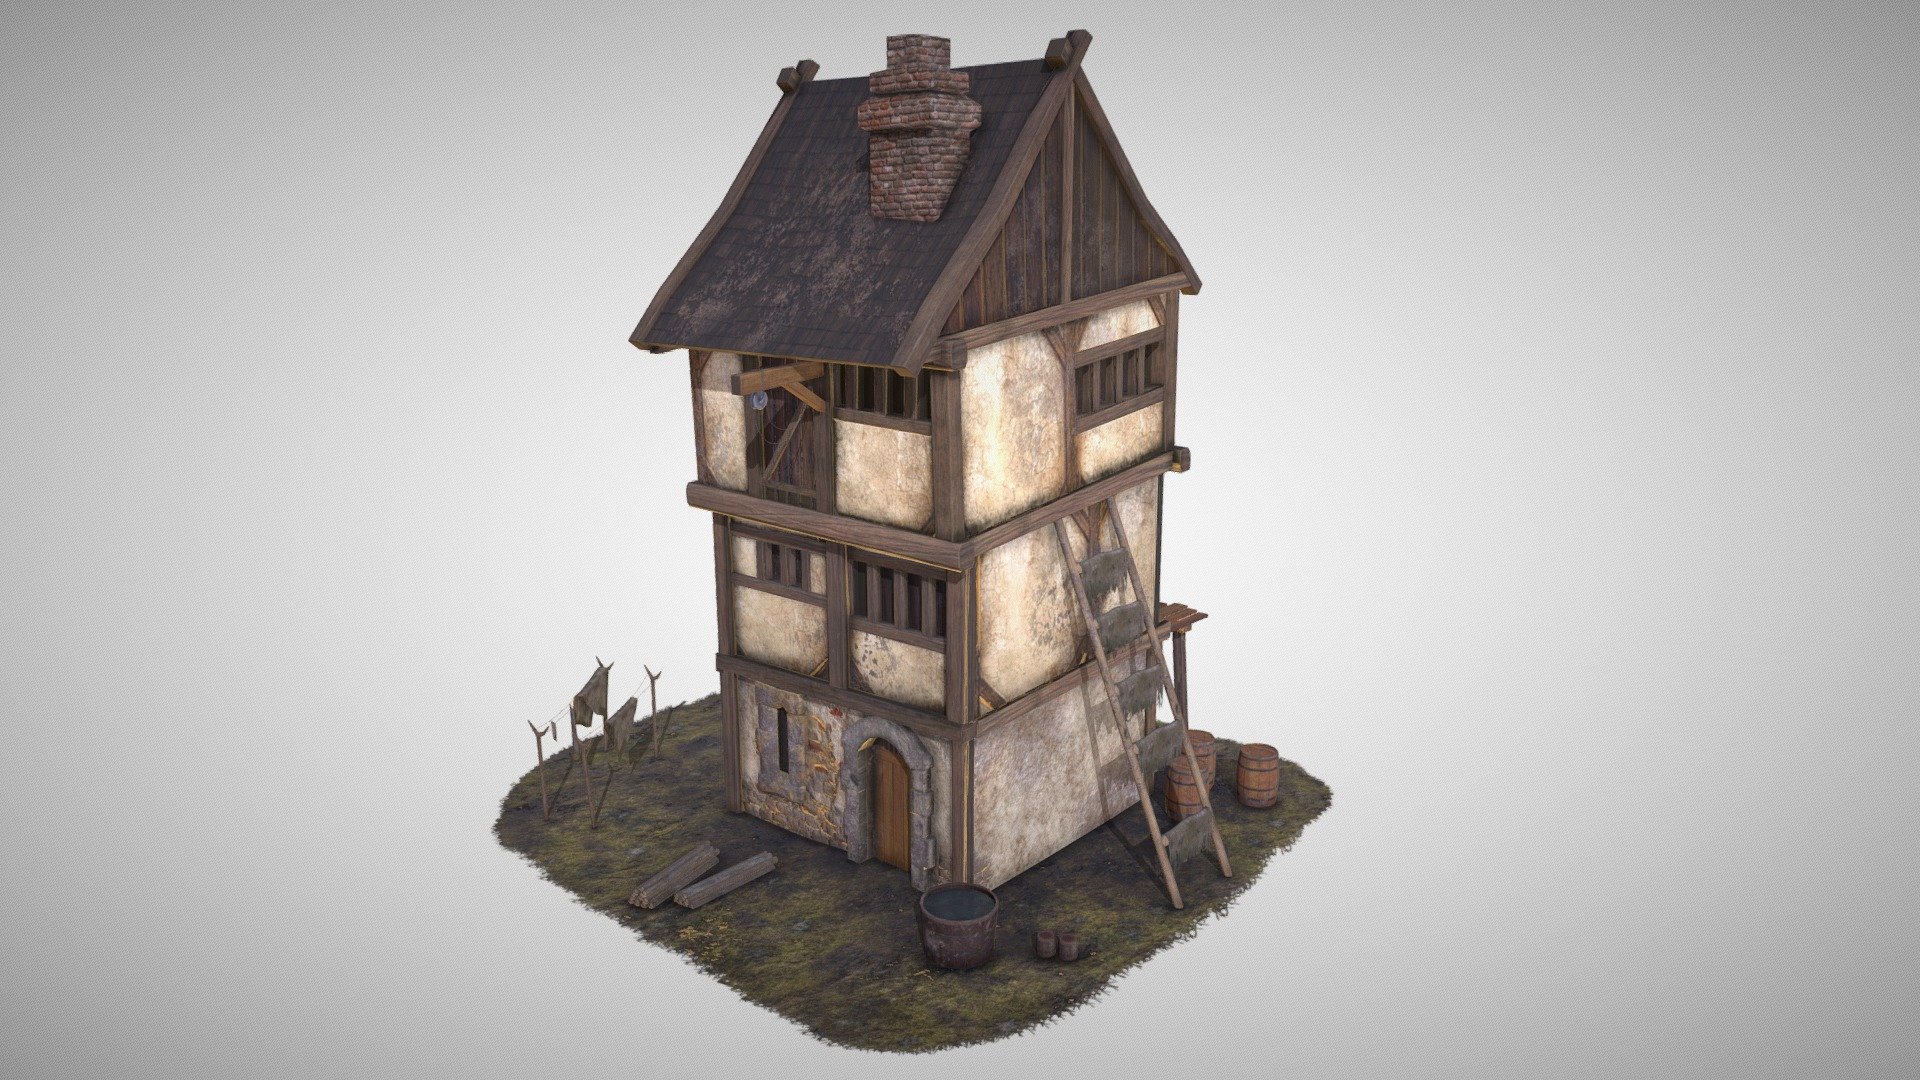 I enjoyed playing Witcher Wild Hunt  which inspired me to create this model.This house is based on houses from Novigrad region in game.

Also, make sure to check my other models. Don’t forget to leave the feedback and rate the models.
Thank you.

Cheers! 


cdprojectred #witcher #novigrad - Crooked House - 3D model by Serious Black 19 (@seriousblack_19) 3d model